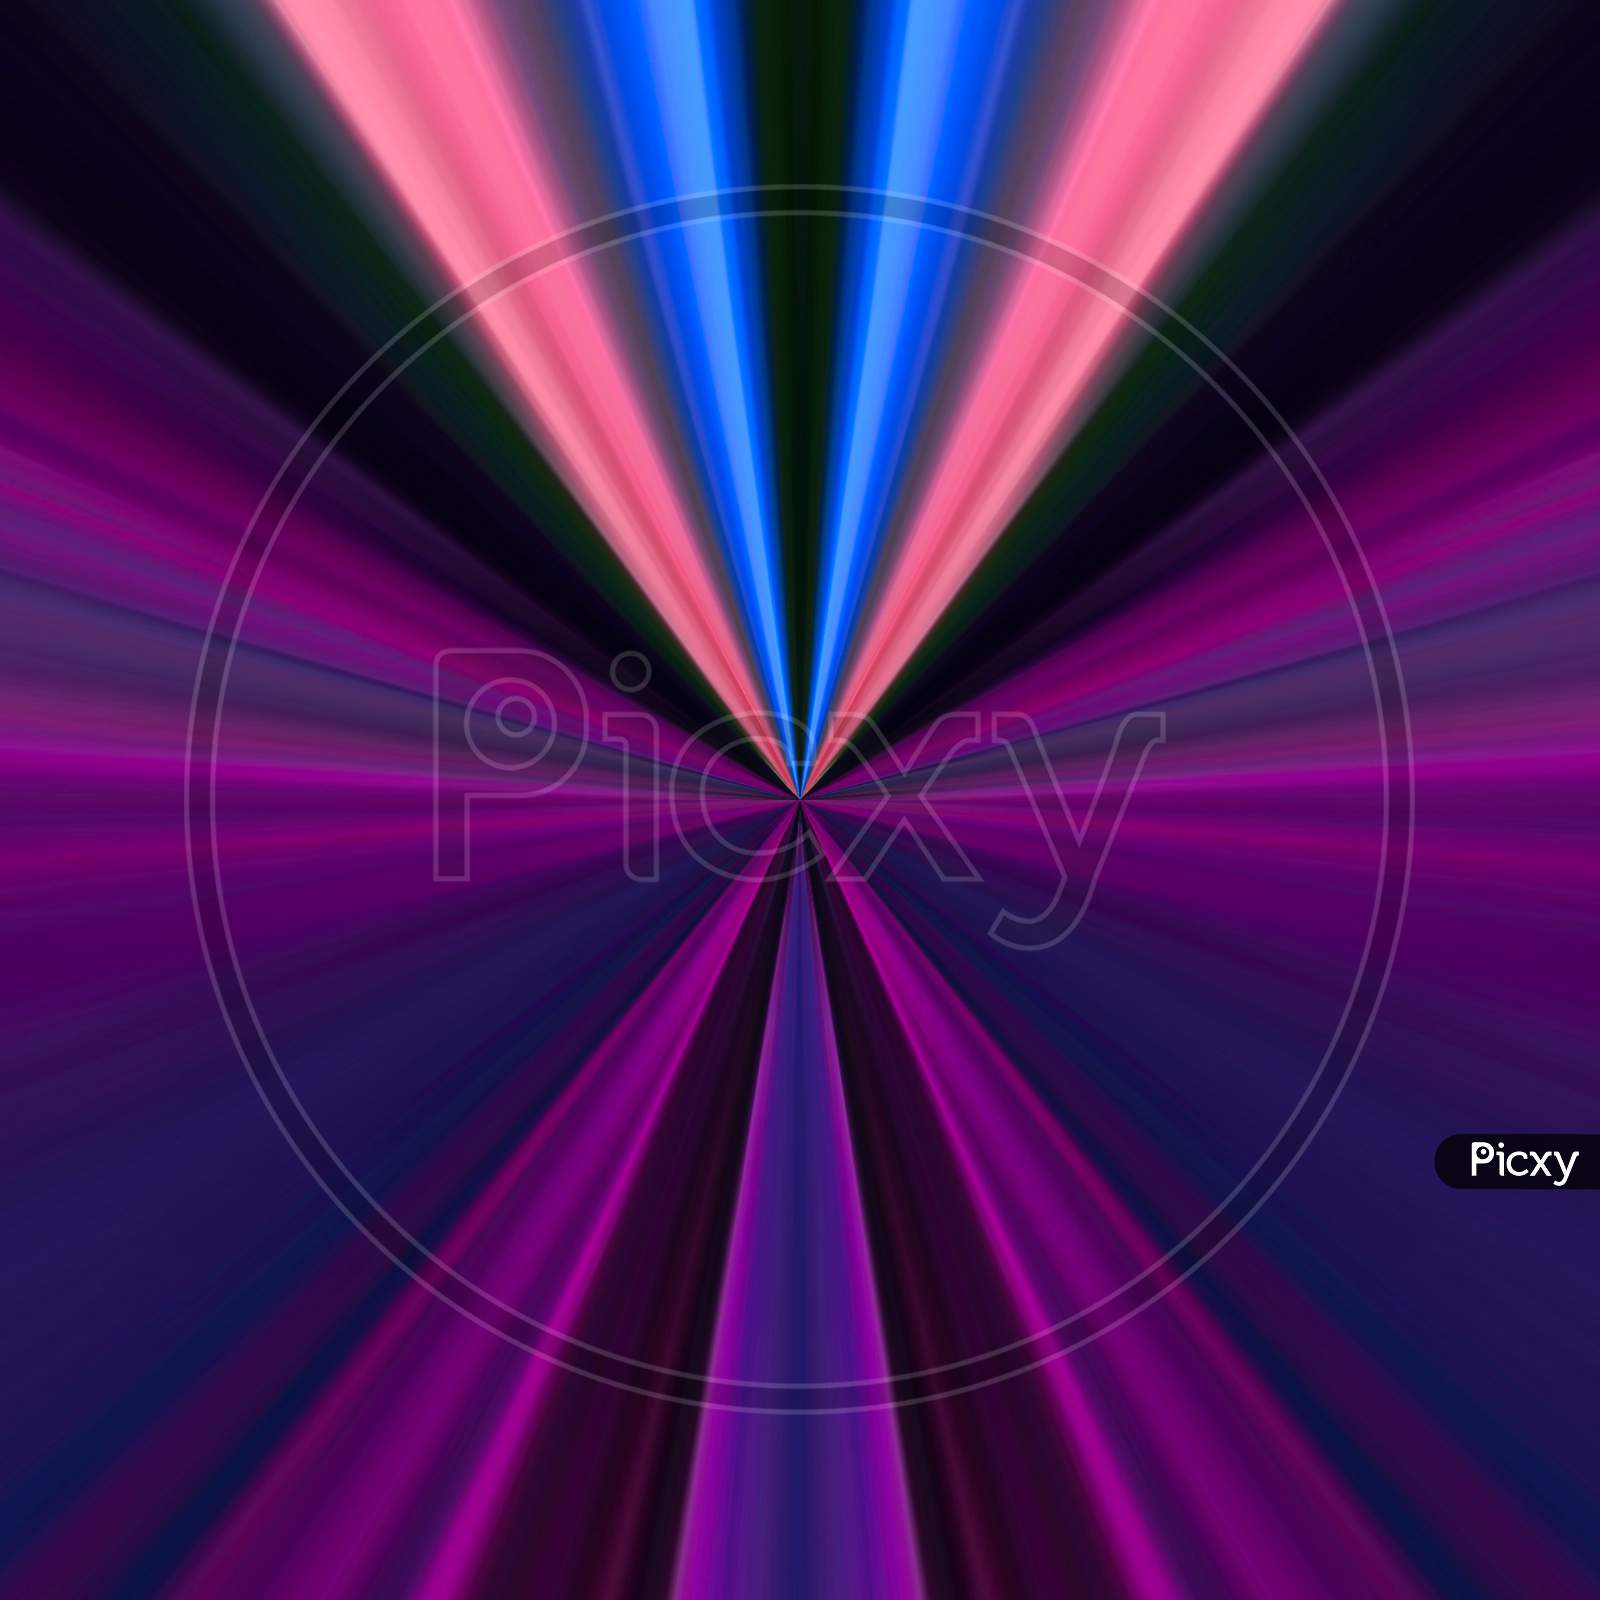 Abstract Optical Illusion Lines In Bright Colorful Background. An Illusion Art Graphic Made Up Abstract Colorful Unique Lines. Creativity And Imagination Lines Illustration.